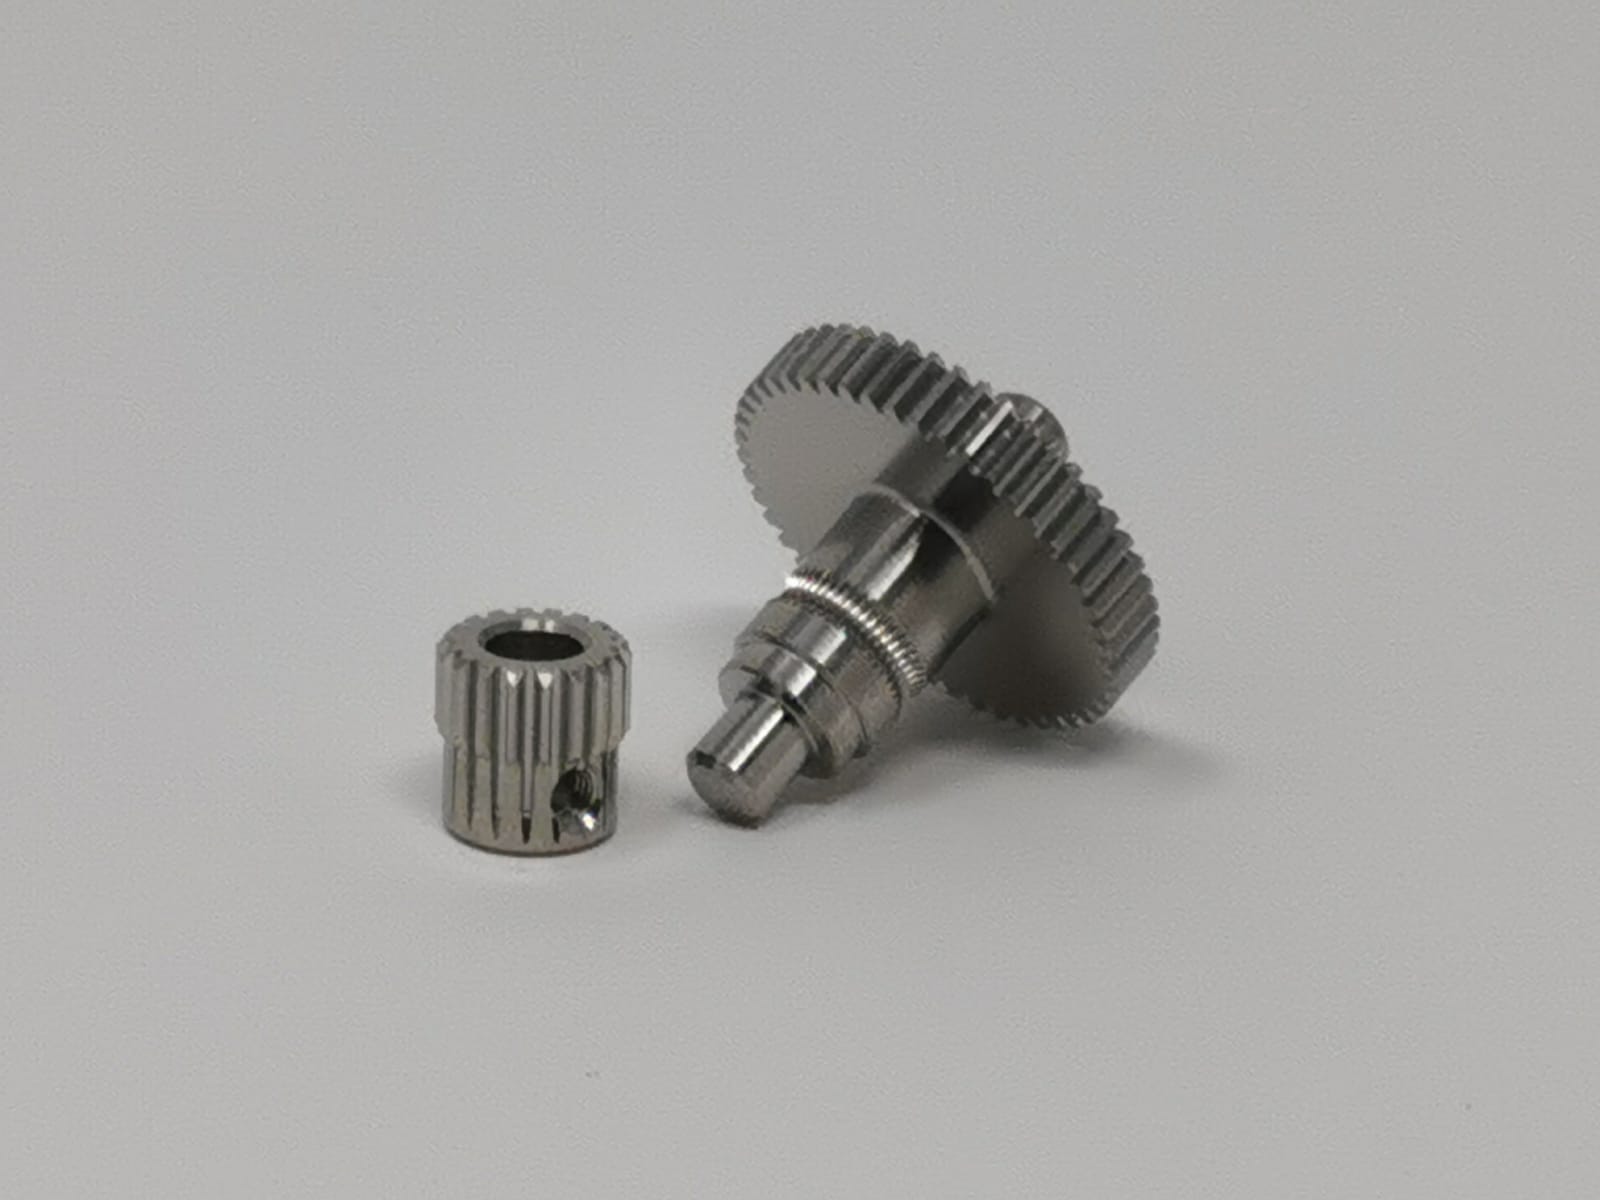 Stainless Steel Extruder Gear Kit for Prusa Mini